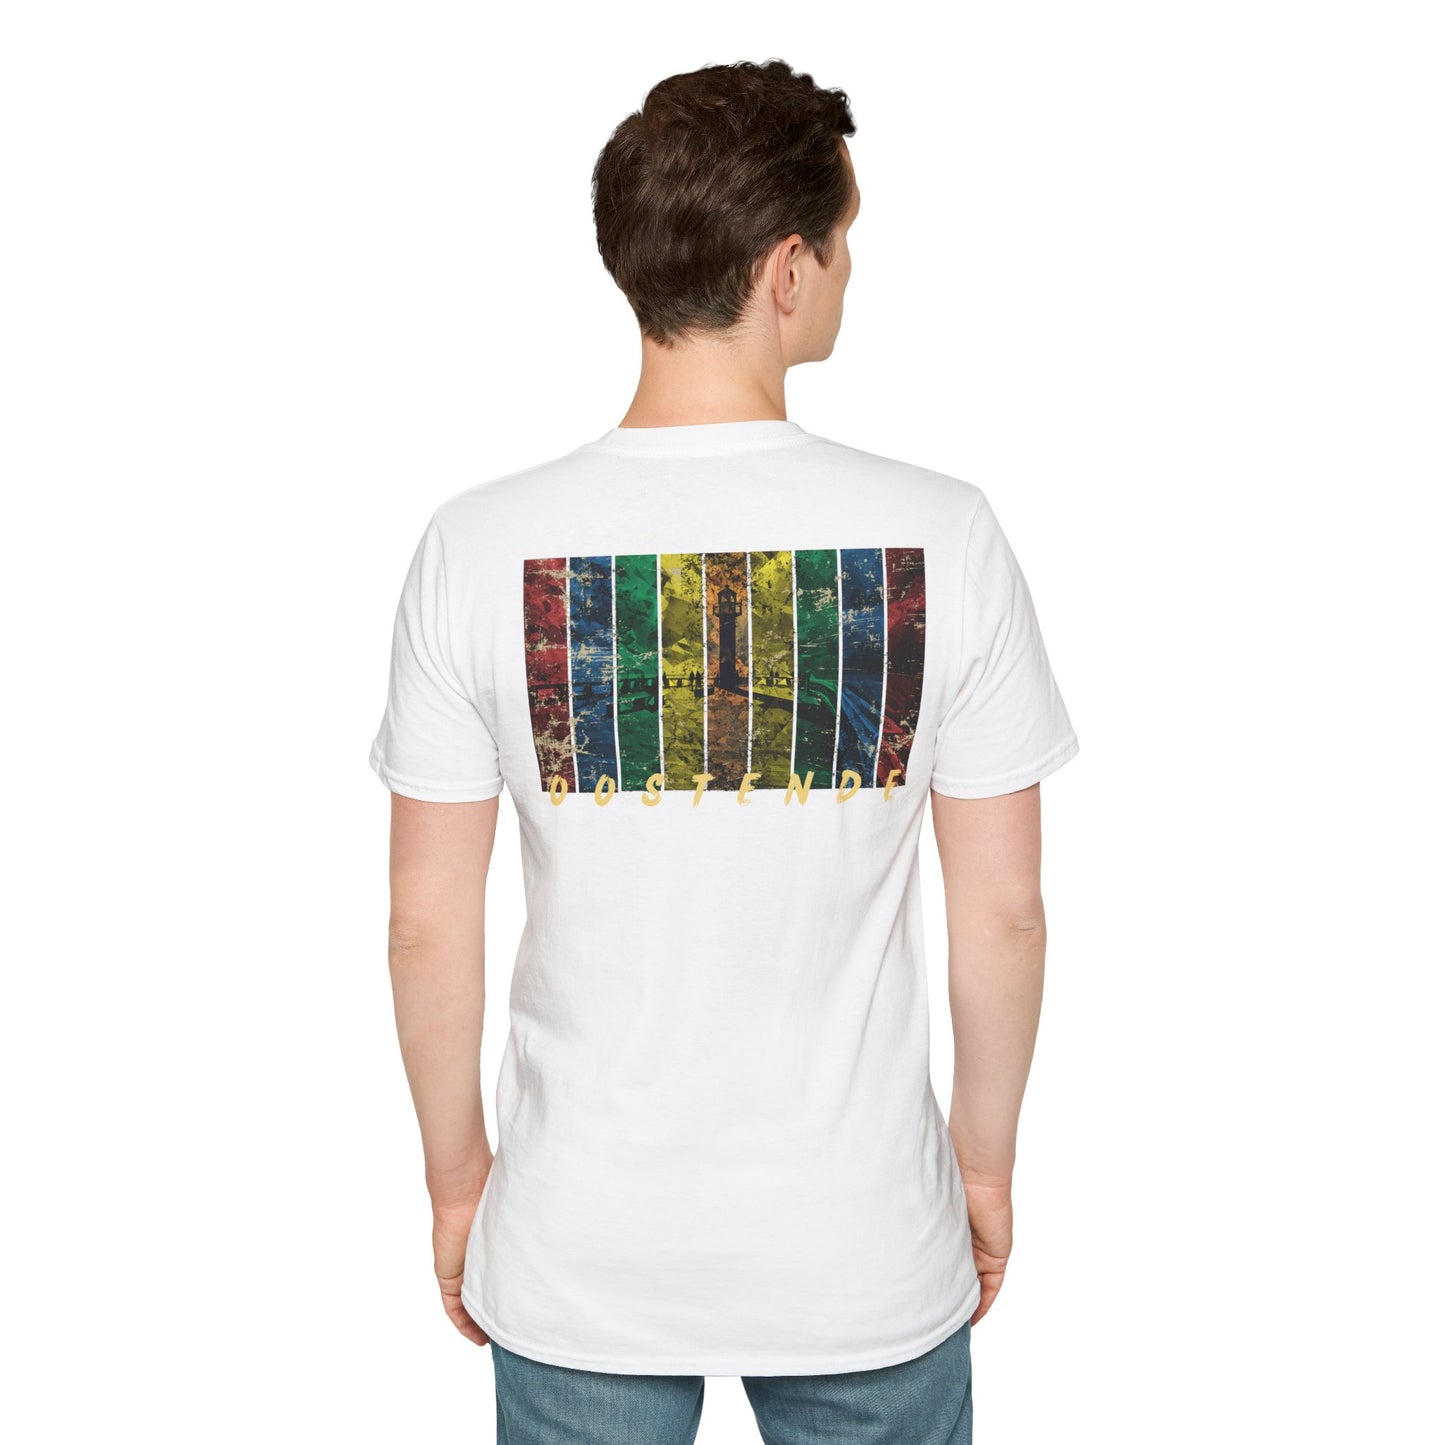 Oostende Staketsel - Unisex Softstyle T-Shirt